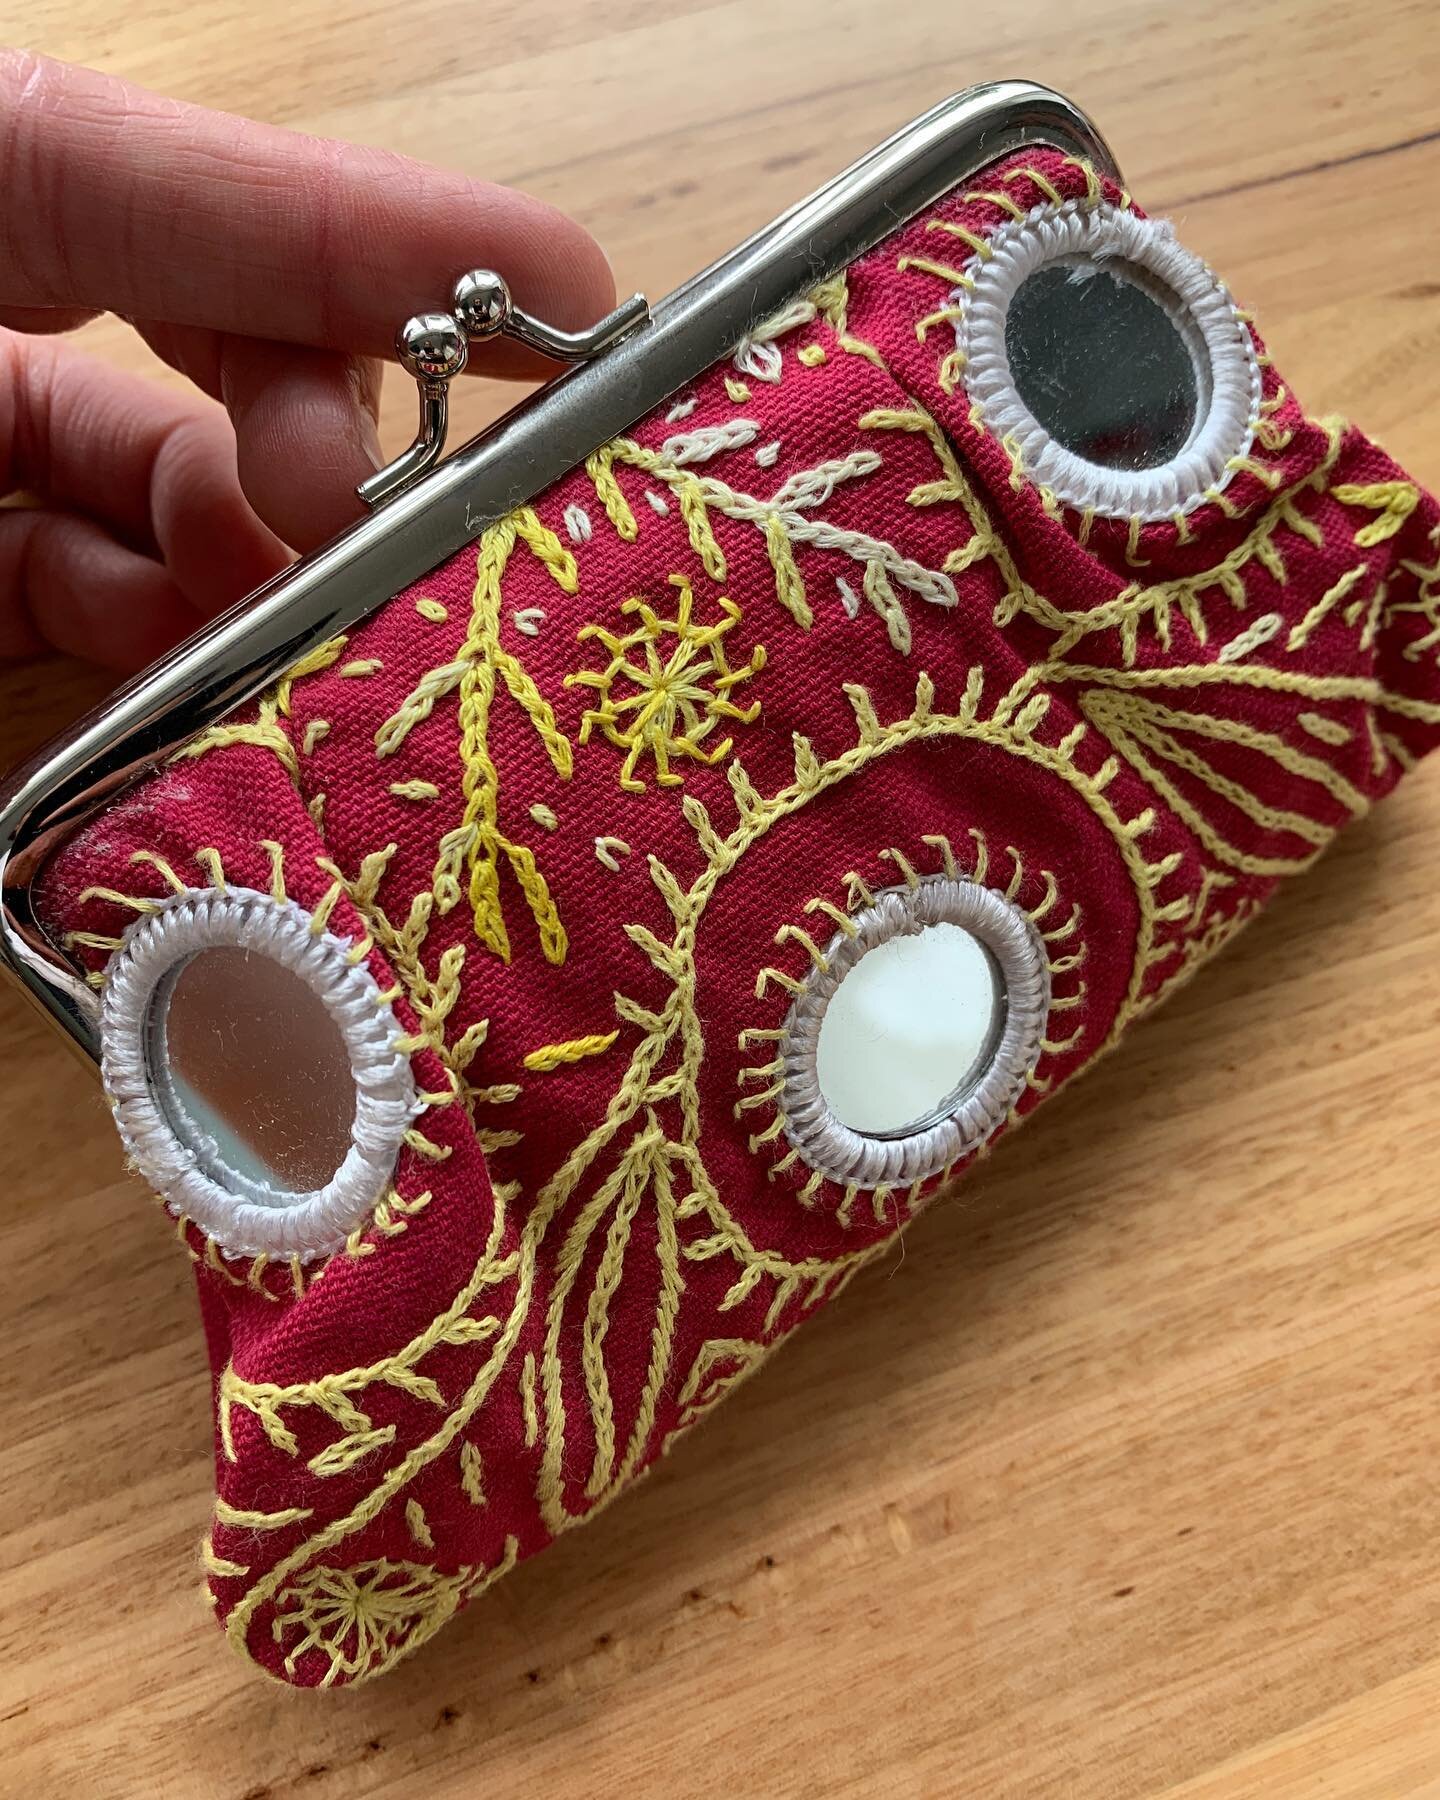 Recently created!

Small red coin purse with colourful embellishments. This delightful coin purse has been made with vintage fabric. 

$15 + postage.

To purchase an item, please comment below or send us a DM. 

***

We will be posting items to purch